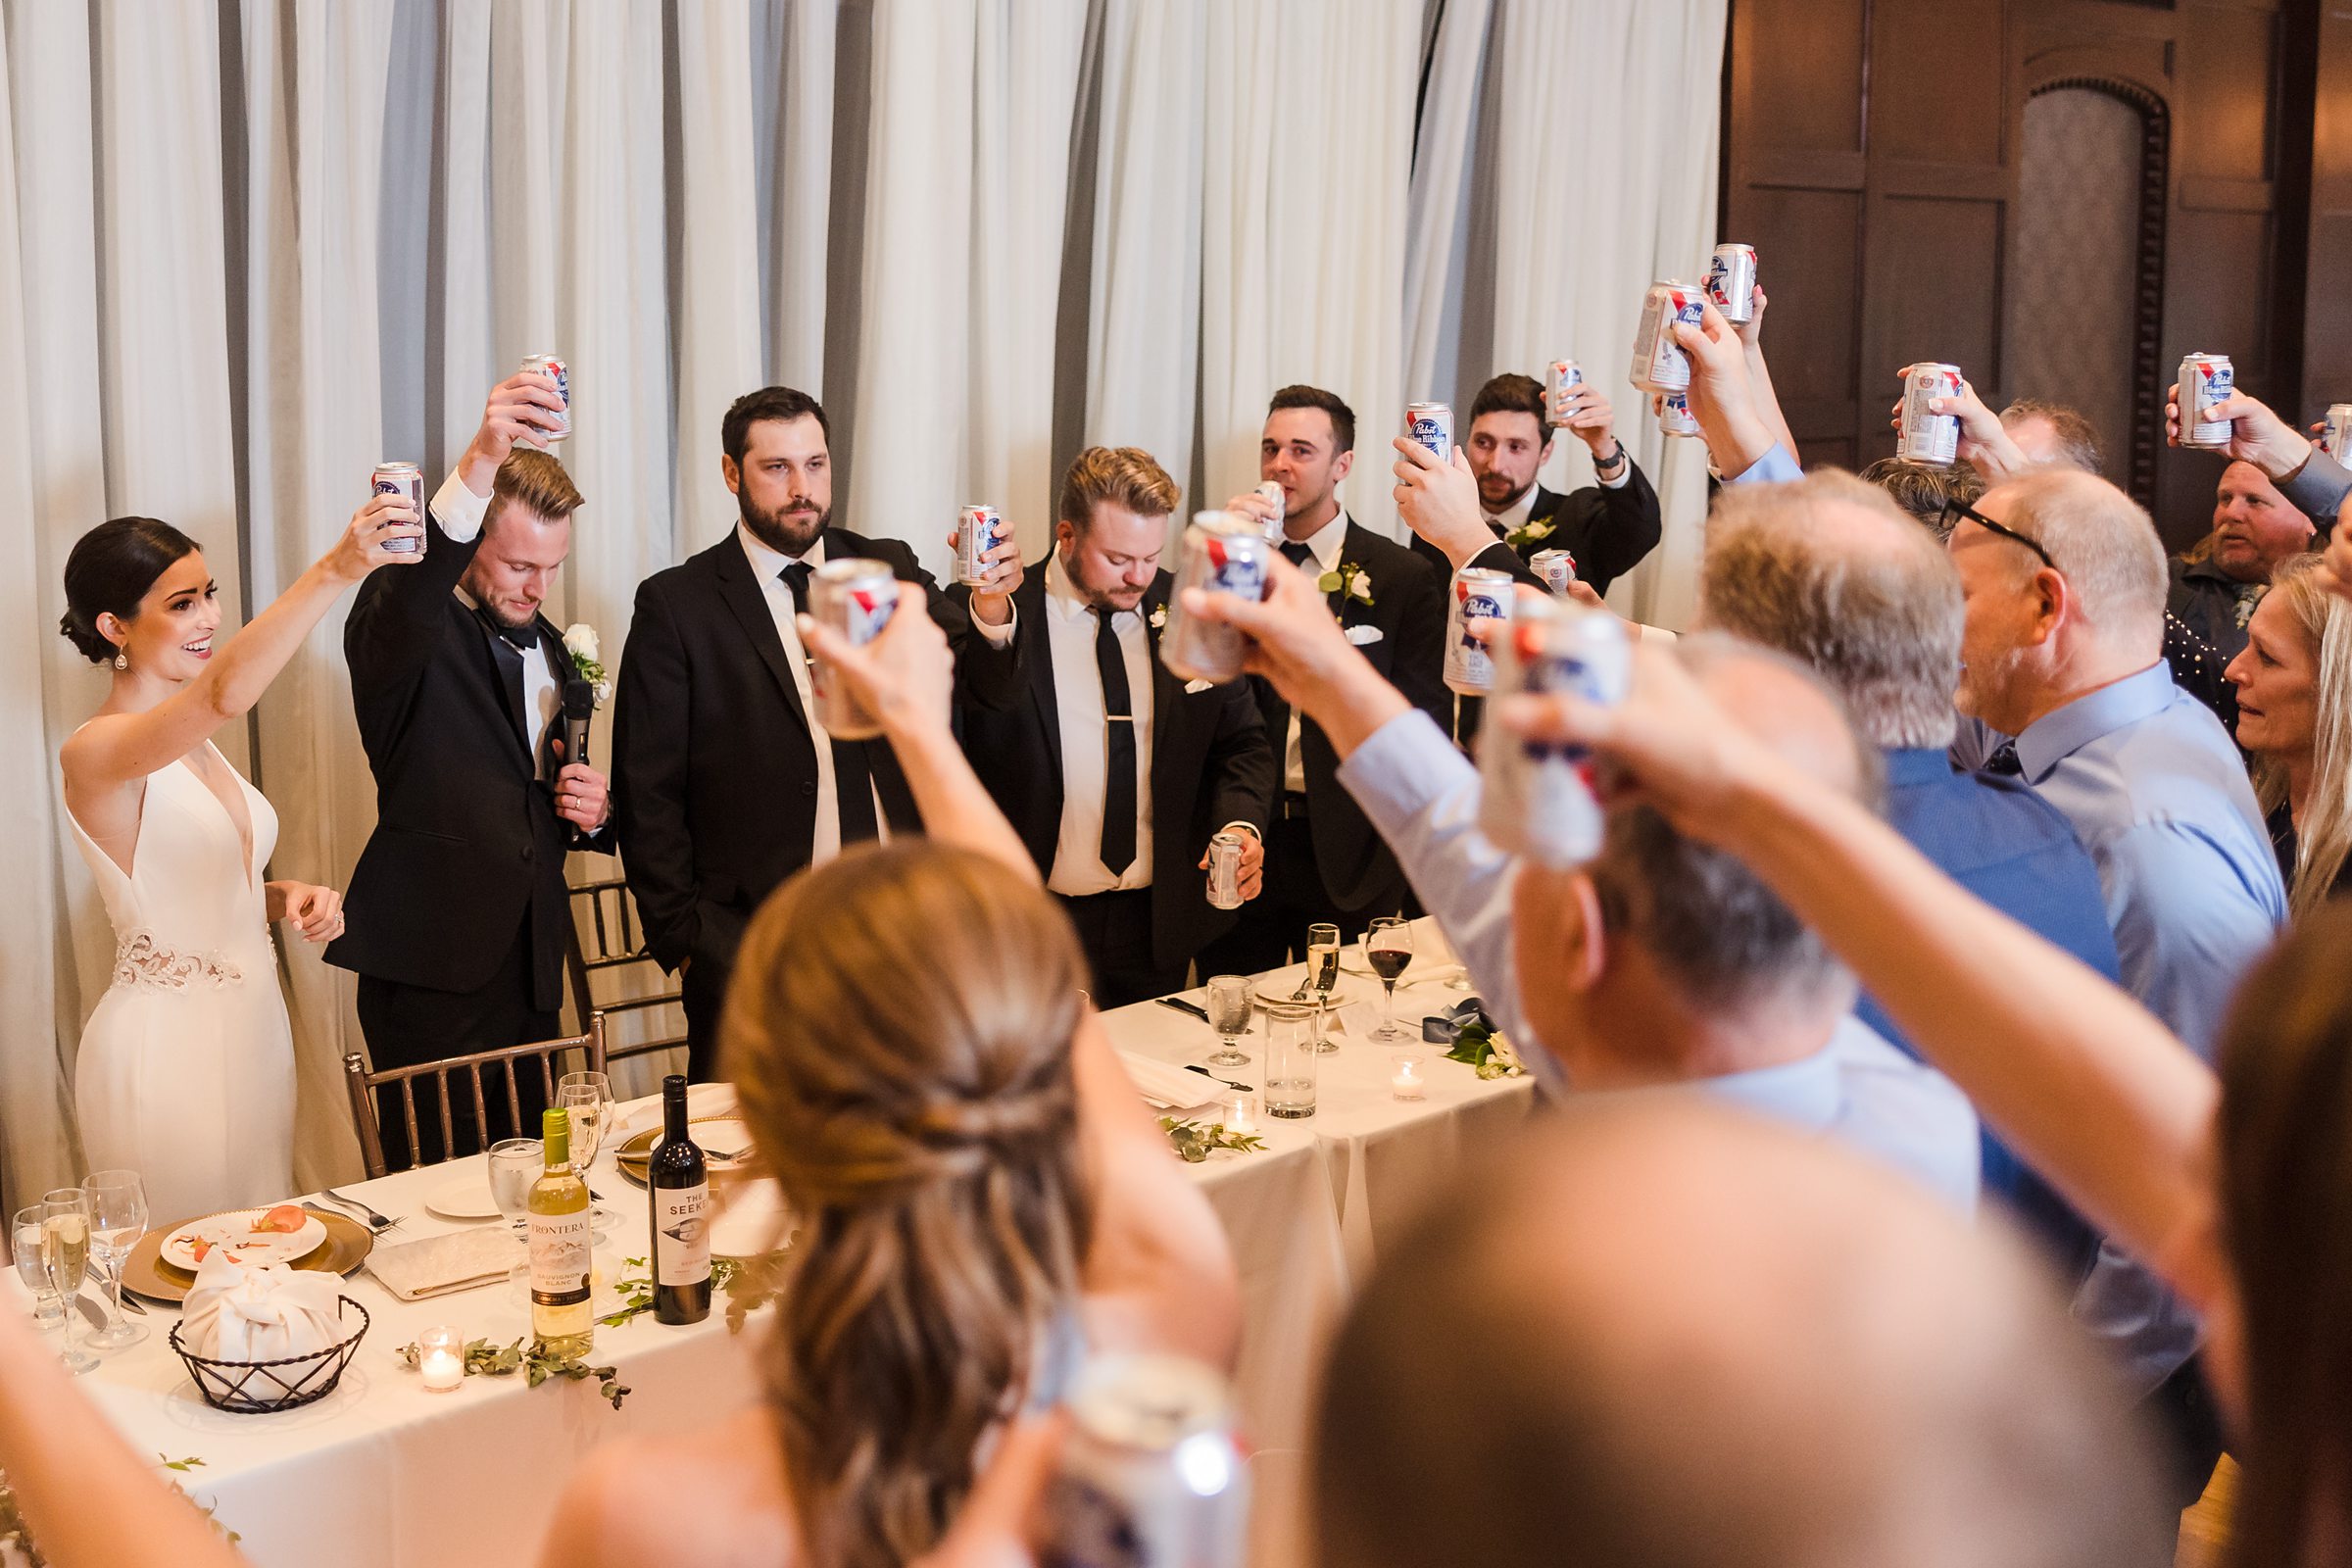 Everyone toasts the groom's father, who passed away, during a wedding at the Chevy Chase Country Club in Wheeling, Illinois.